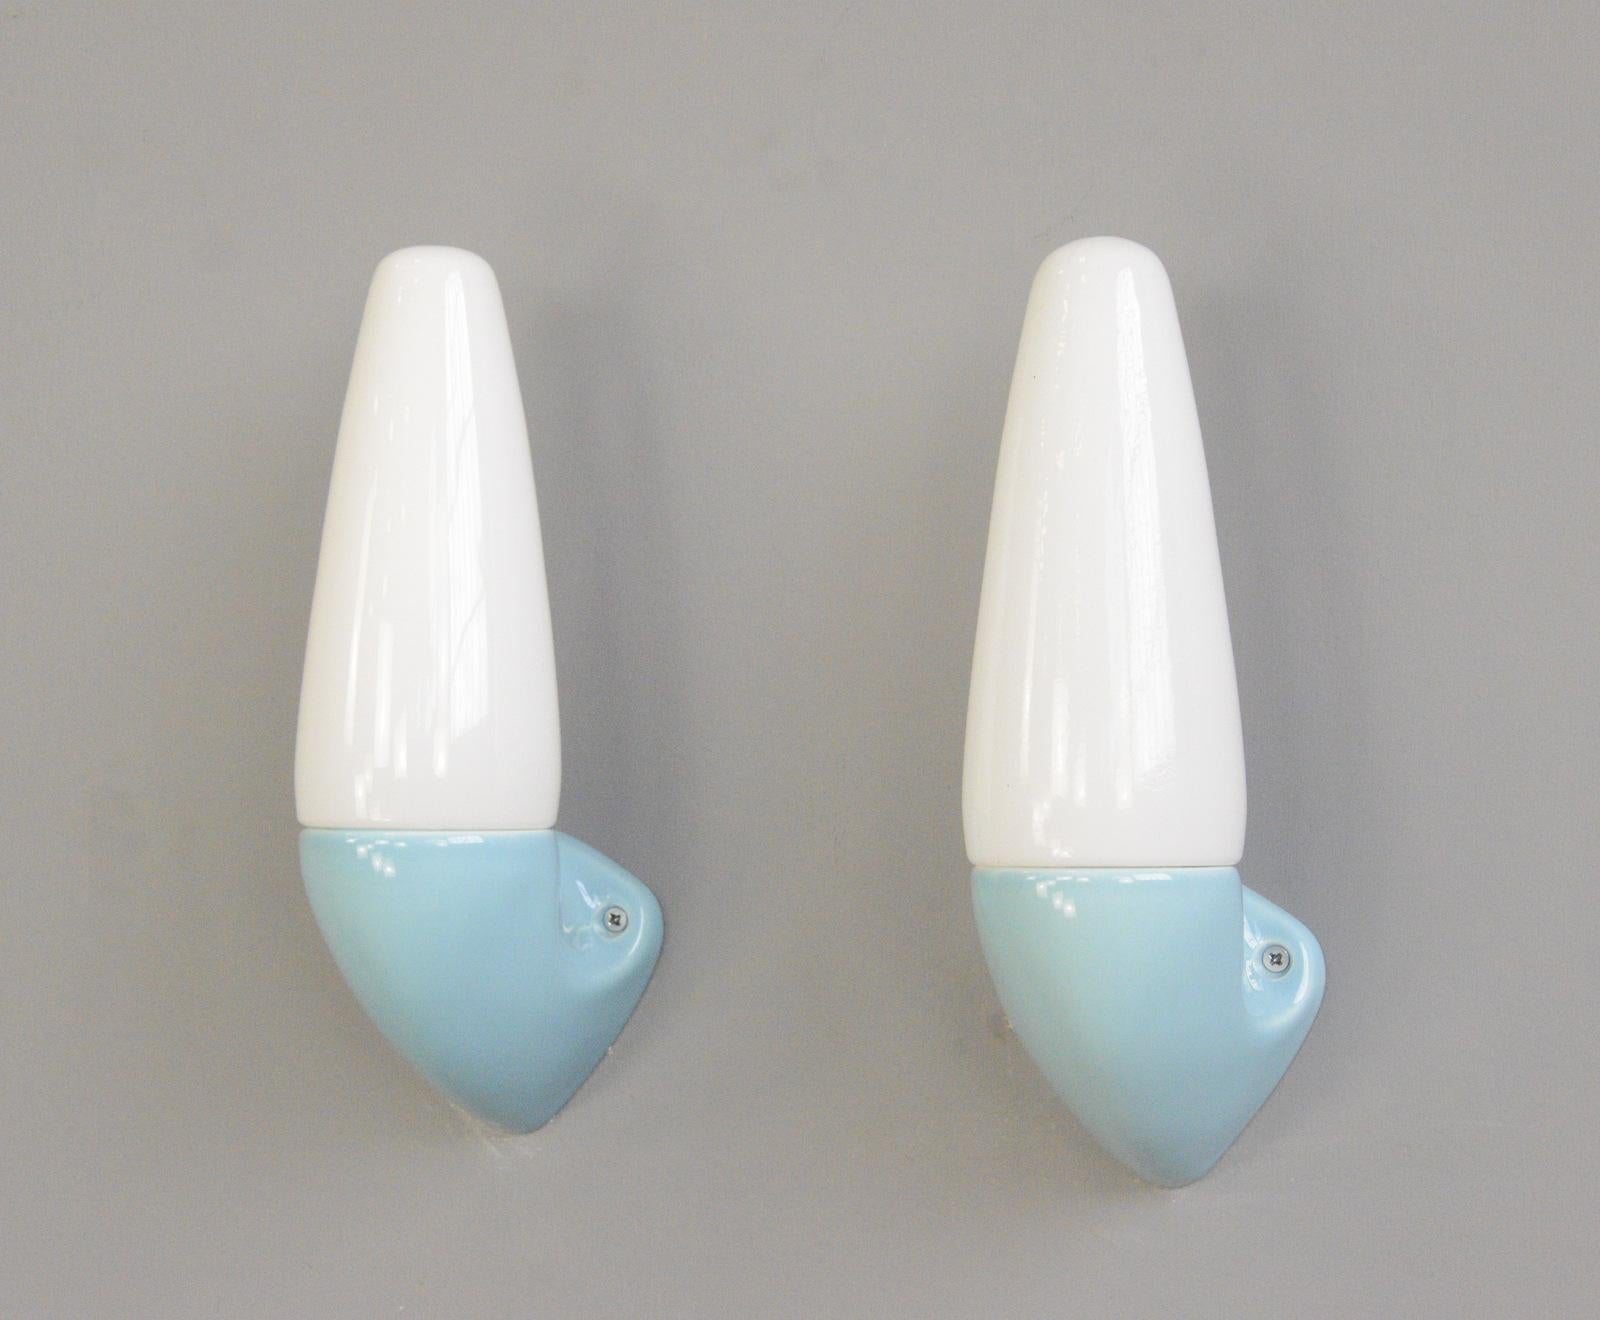 Mid-20th Century Porcelain Bathroom Lights by Sigvard Bernadotte for Ifo Circa 1950s